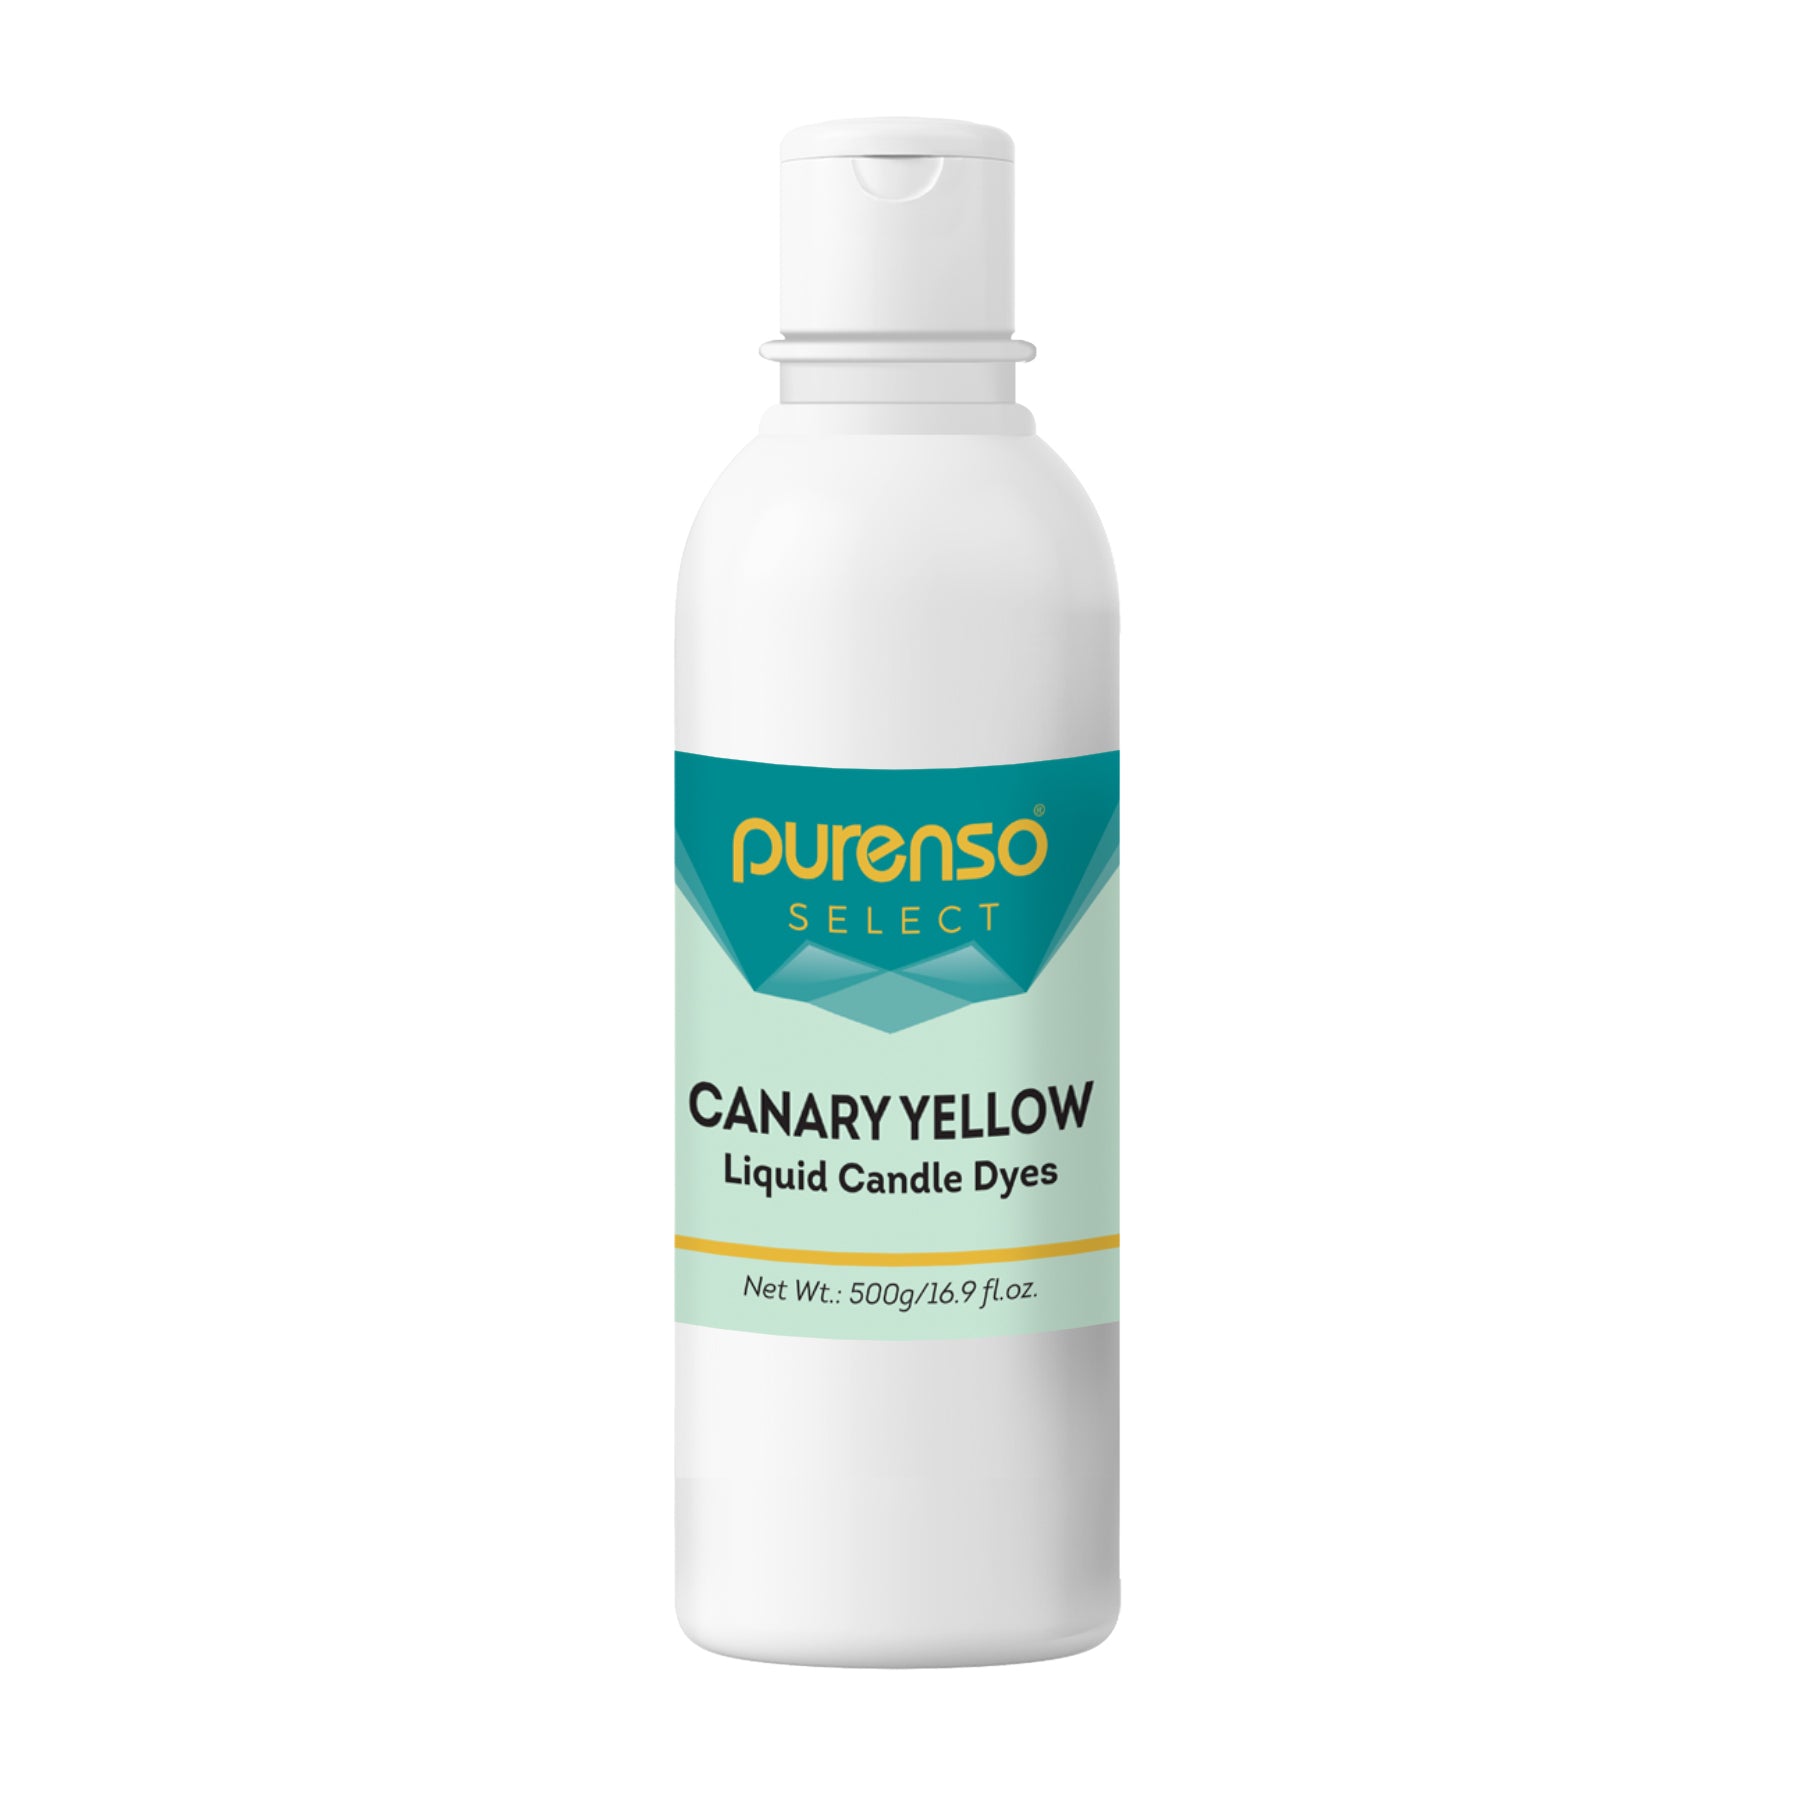 Candle Liquid Dye Color at Best Price in India I Candle Making Supplies  Online - Purenso Select